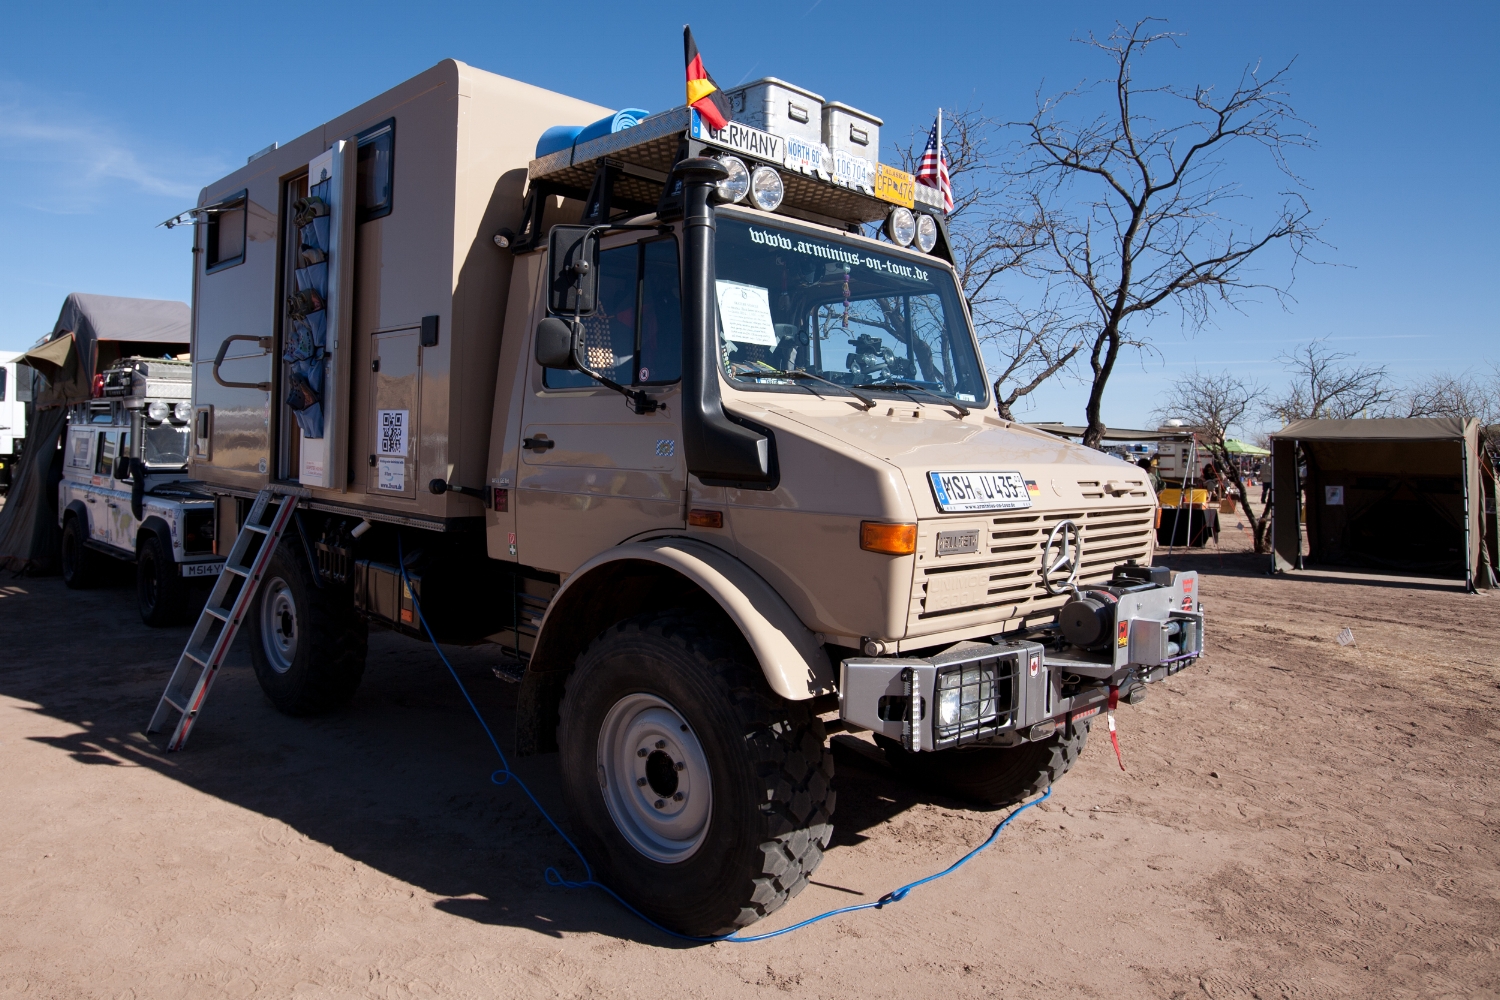 Unimog Expedition Vehicle 2022 Mercedes-Benz POSSIBLE IMPORT TO